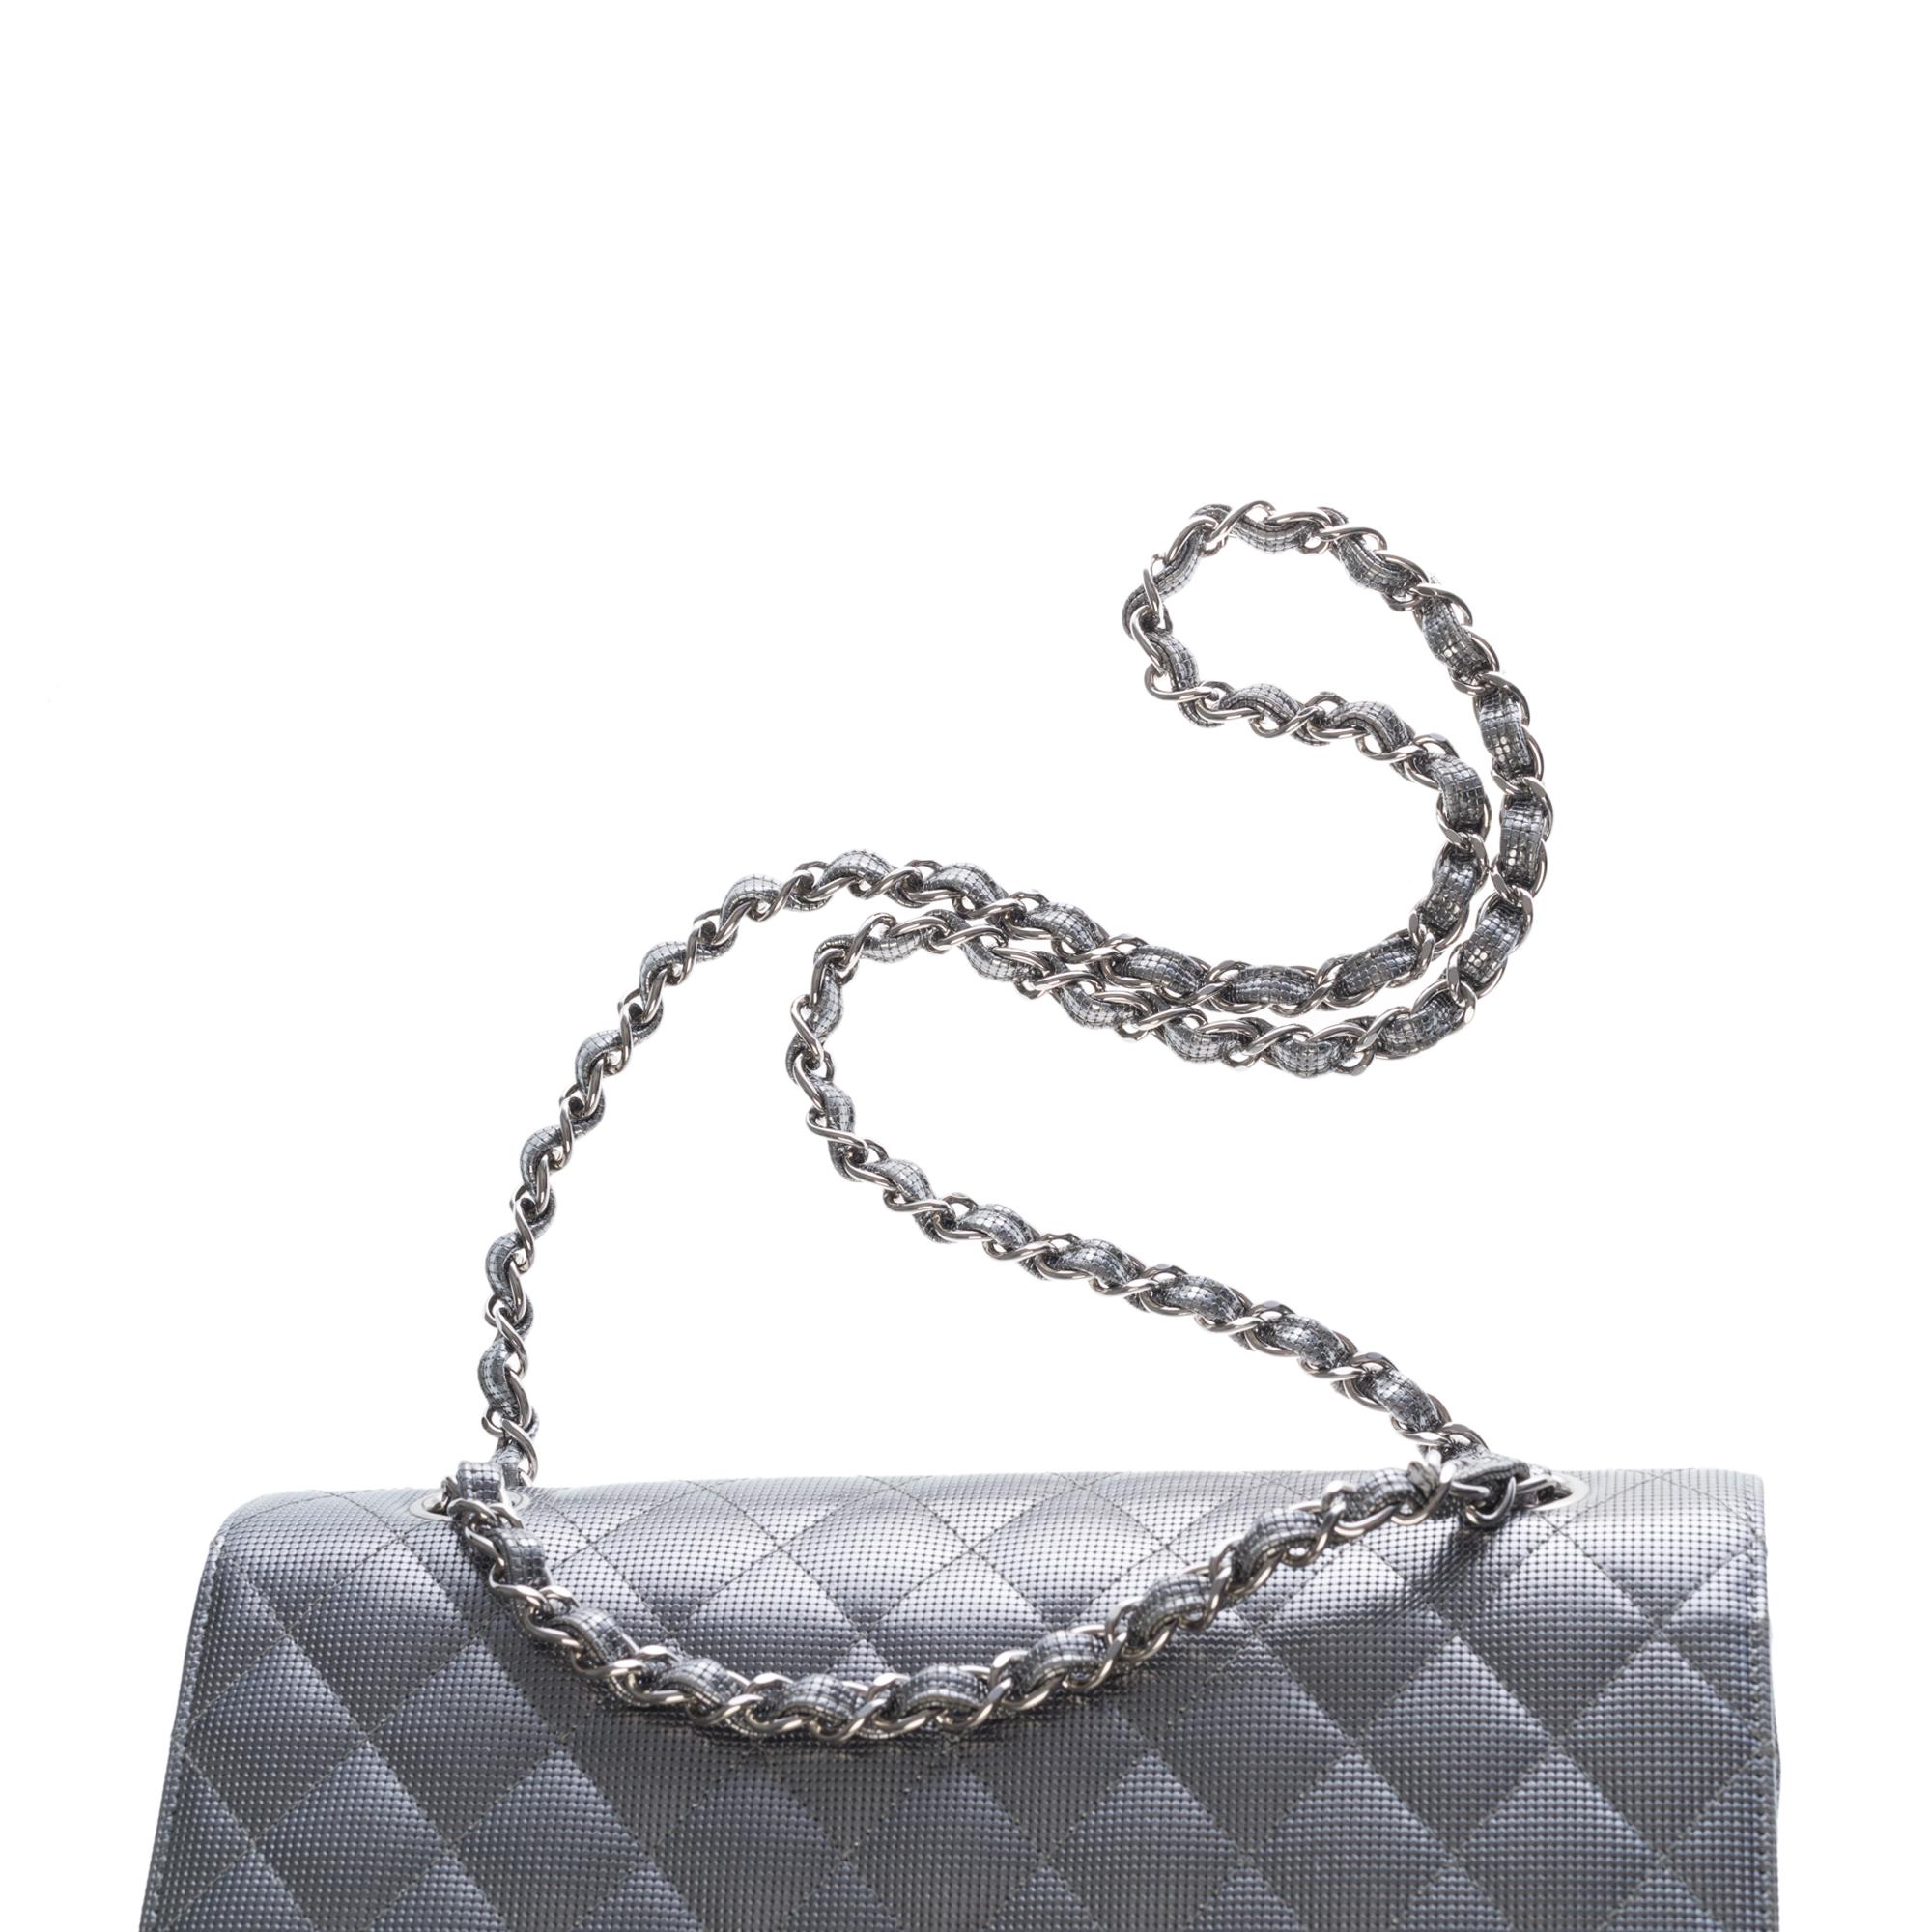 Chanel Timeless double flap Shoulder bag in Silver Metal quilted leather, SHW 4